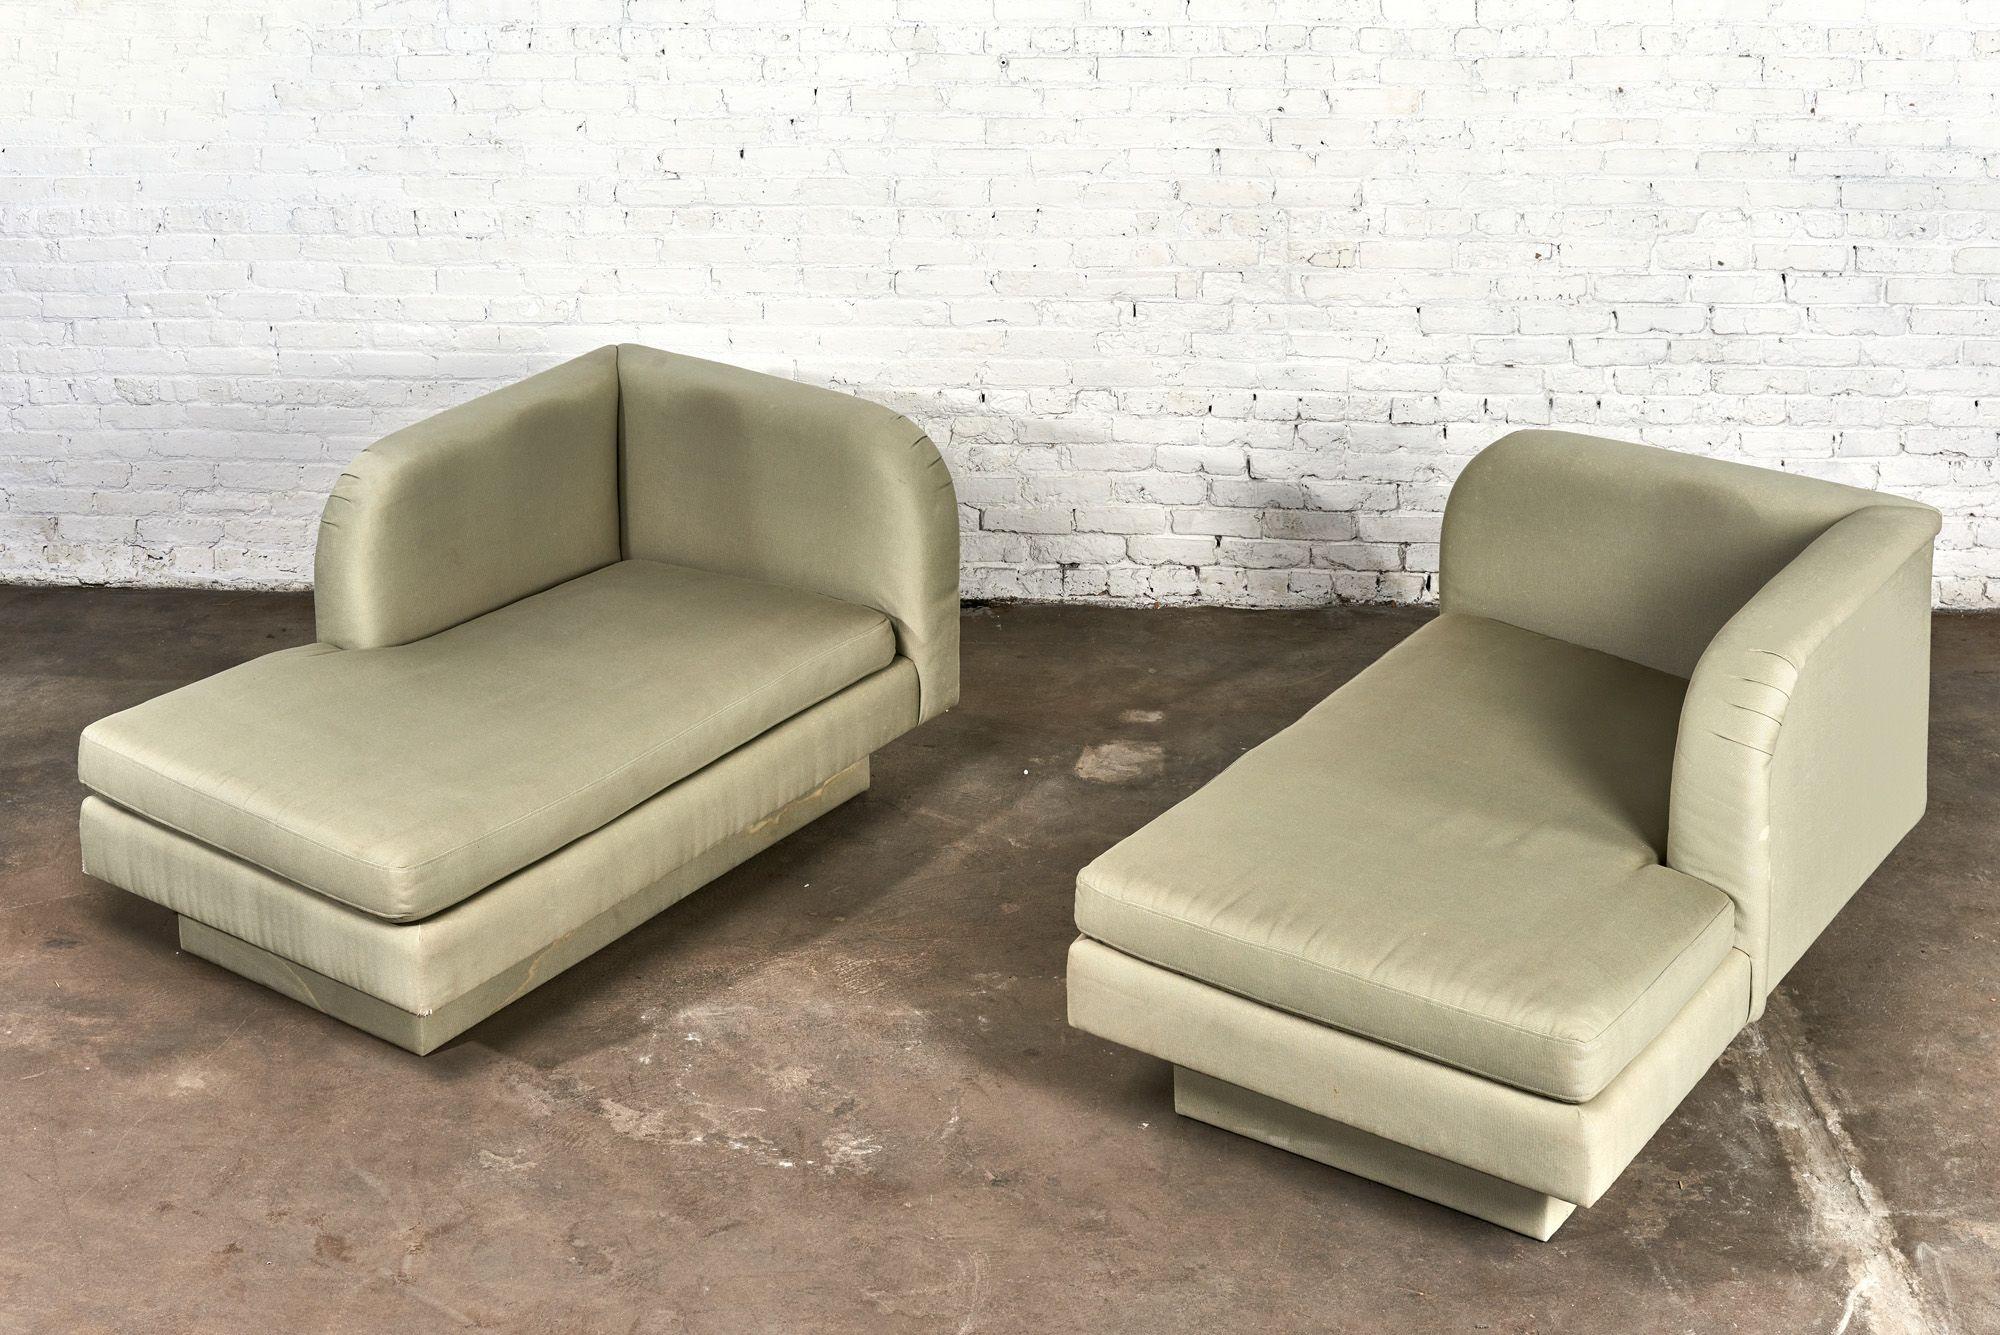 American Pair Post Modern Chaise Lounges, 1980